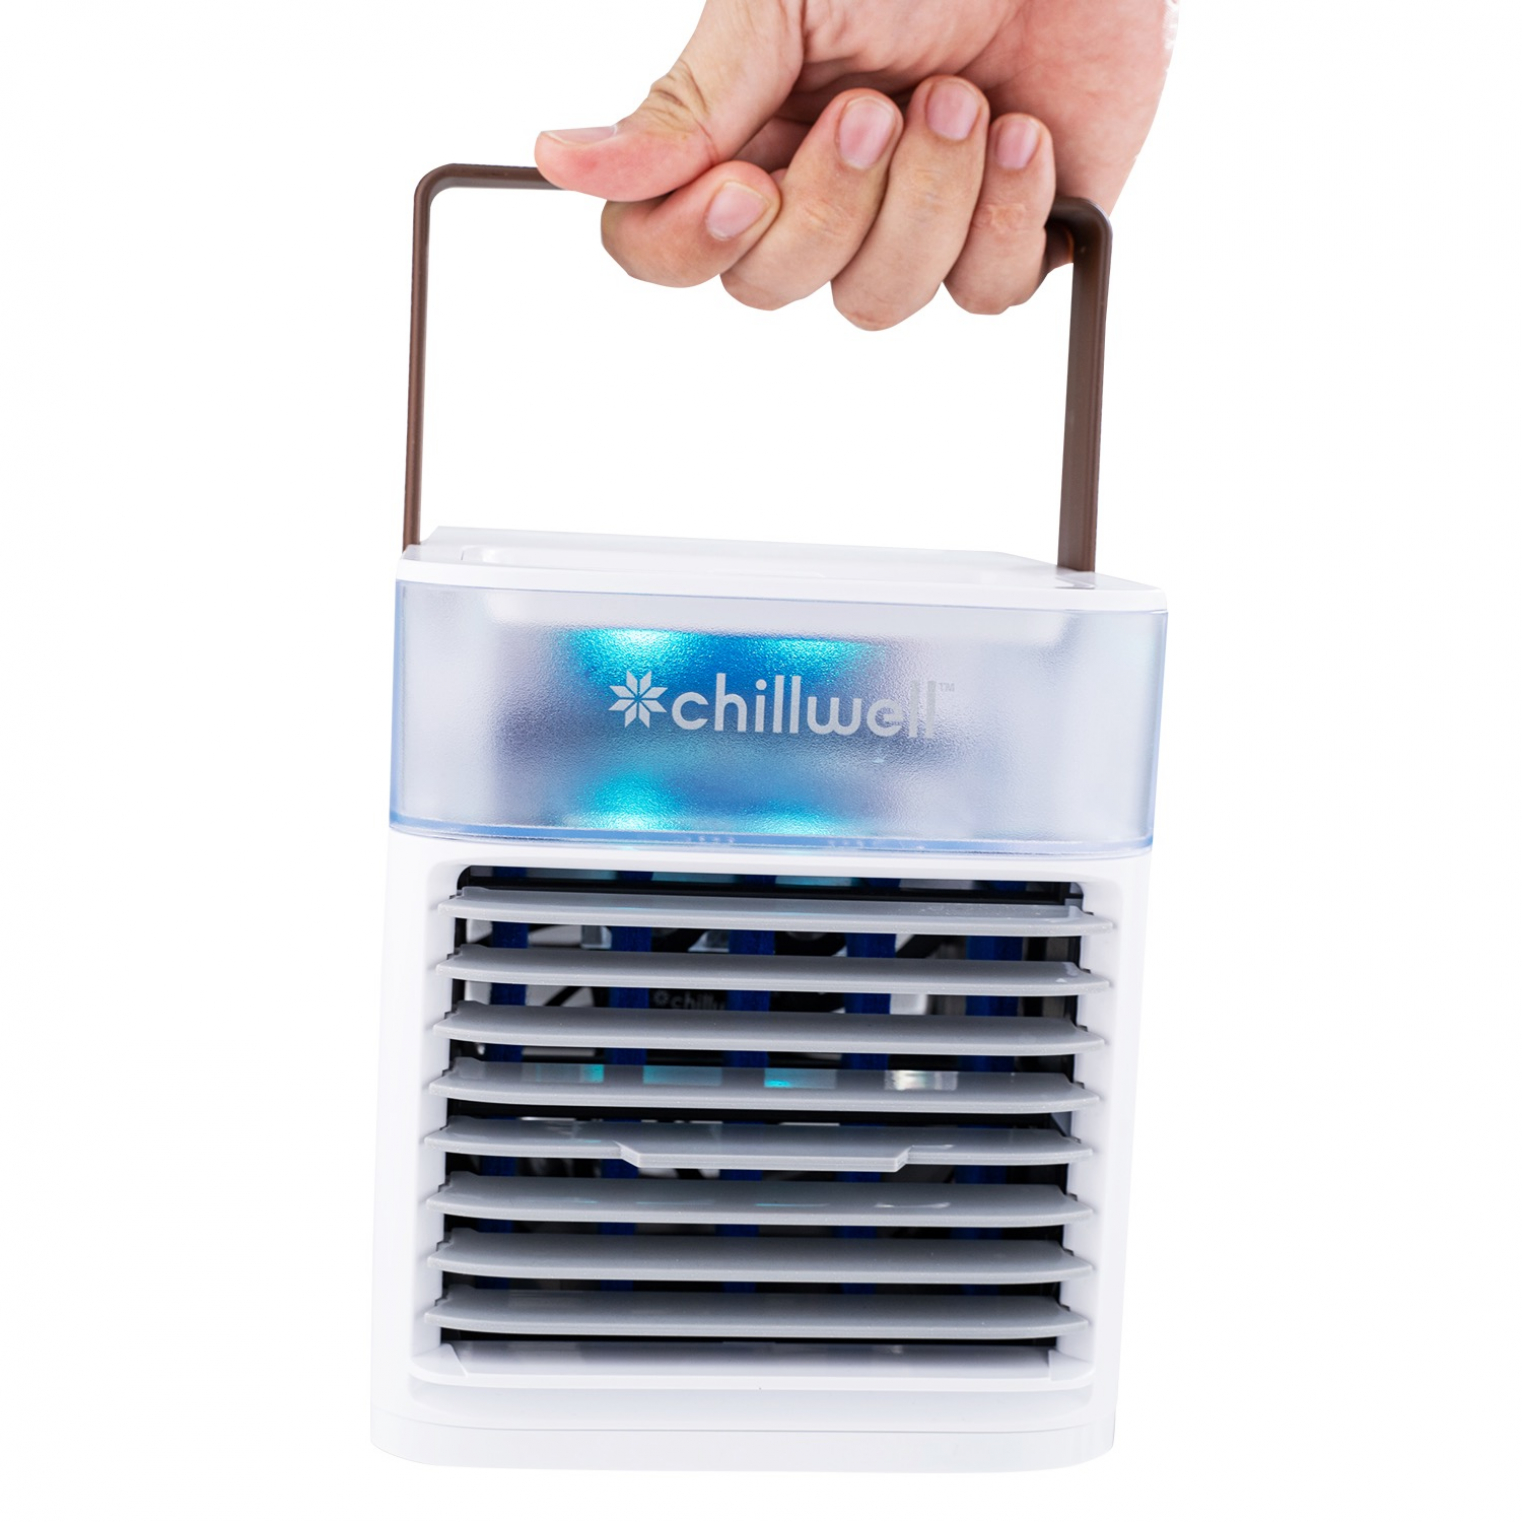 Chillwell Ac Portable Ac Reviews Reddit